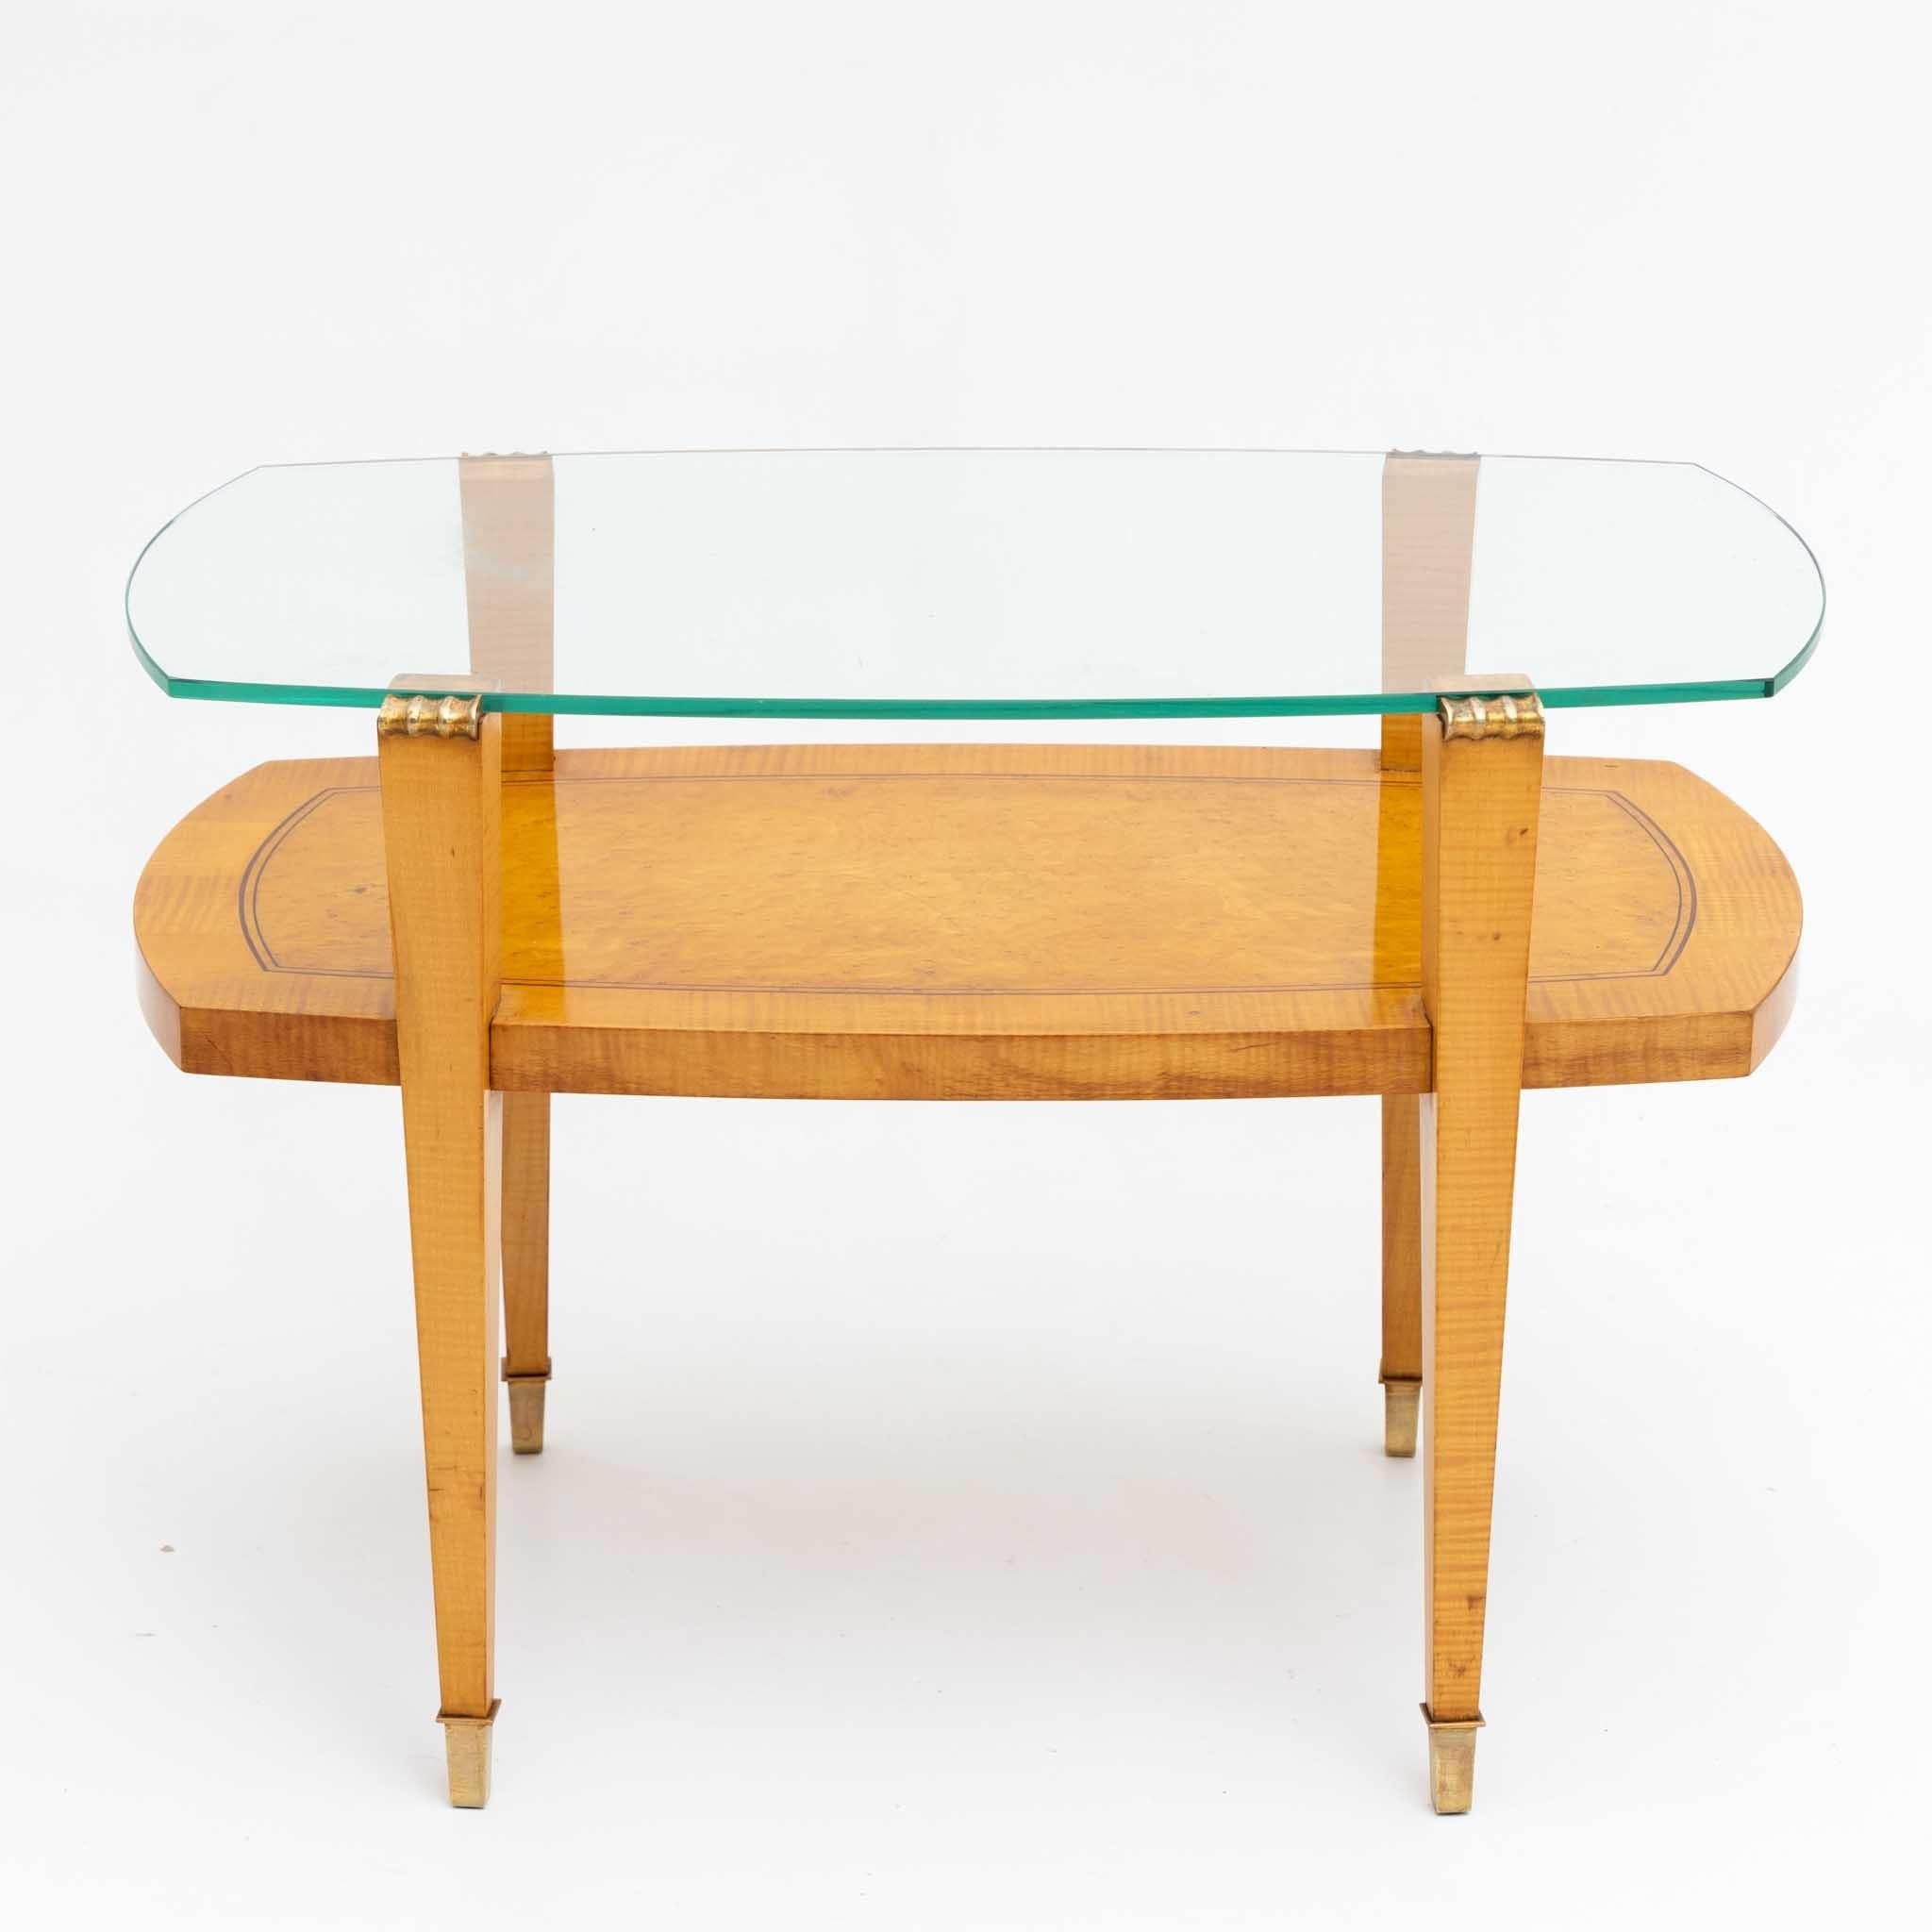 Coffee table with glass top on square tapering legs with brass sabots and intermediate shelf. The glass top is rounded on the narrow sides, as is the table top underneath. The table is veneered in Birch and hand polished.